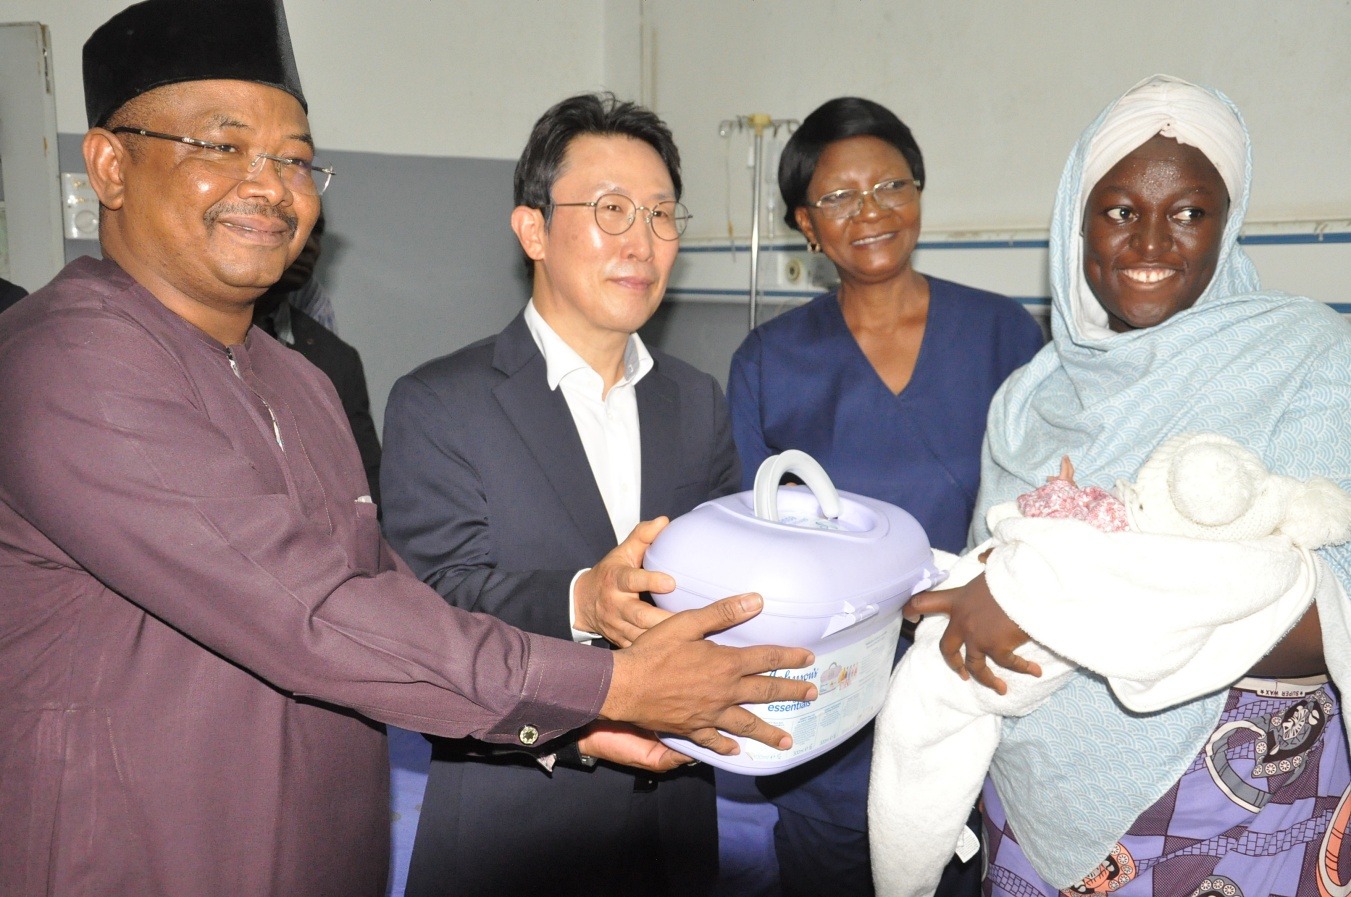 Medical Director, Federal Medical Center, Abuja, Prof. Saad Ahmed, Managing Director, LG Electronics West Africa Operations, Mr. Youn Kim and Hajia, Rasidat Balah, a mother with a new born baby receiving the donated items at the LG Electronics CSR Initiative donation of New Gencool Air Conditioning Units, Inverter Linea Refrigerator, Twin Tub Washing Machine Mosquitos Nets, Diapers and Baby Kits to the management of the Federal Medical Center, Abuja today.